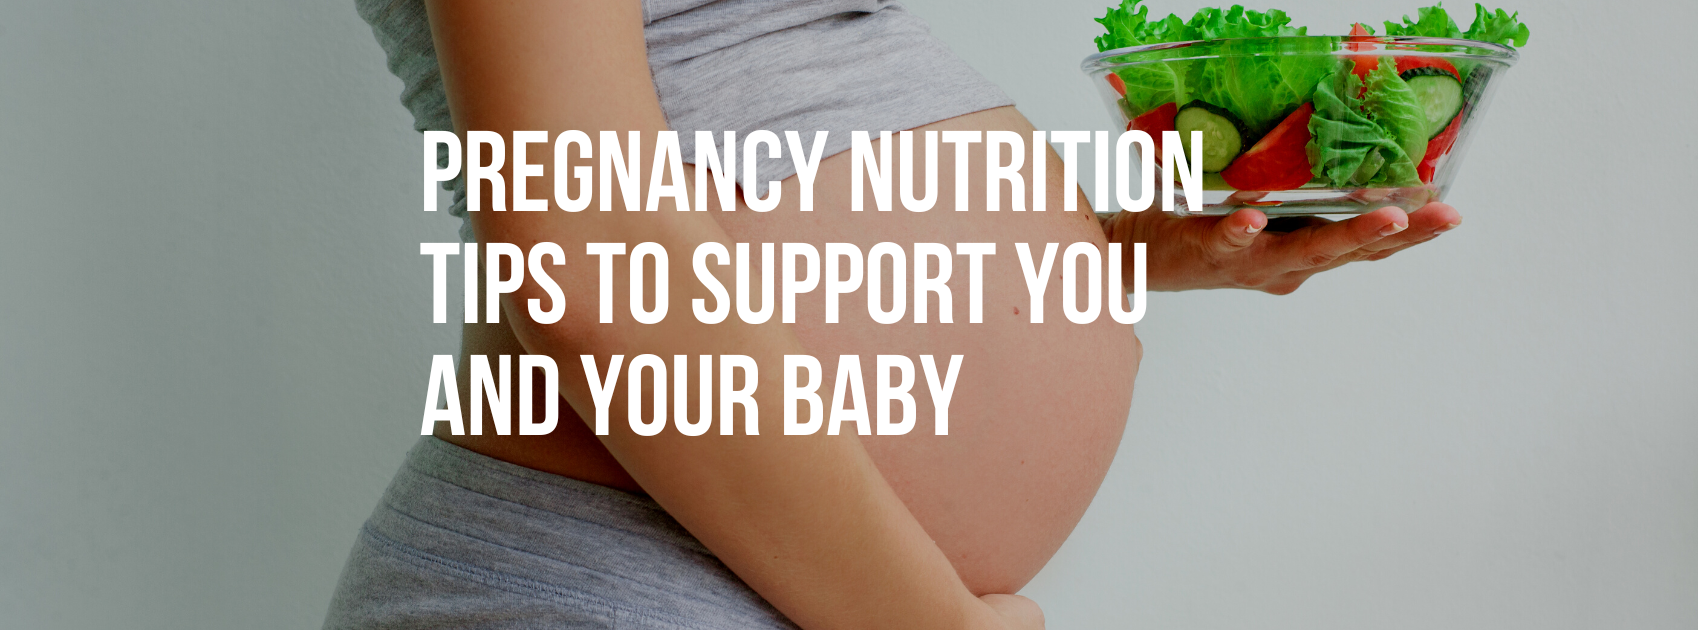 Pregnancy Nutrition Tips to Support You and Your Baby